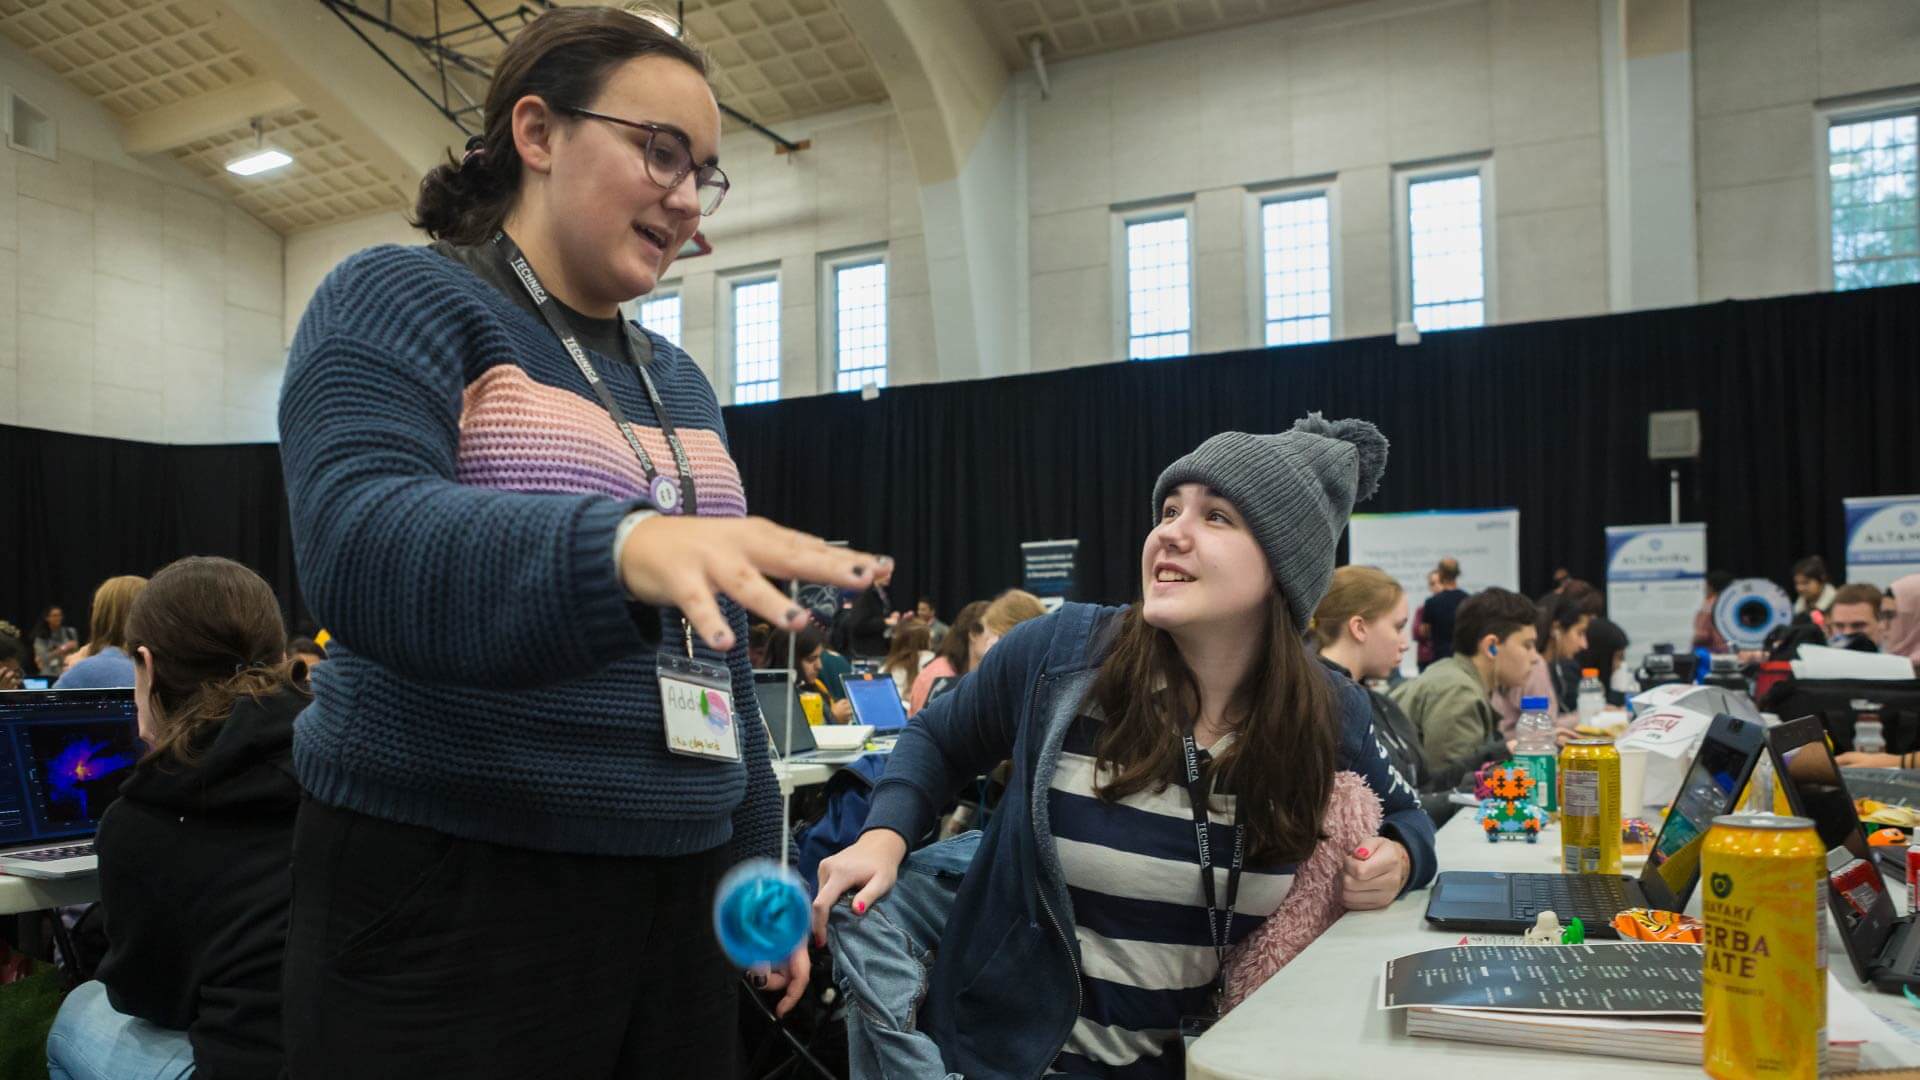 Catoctin High School junior Addison Eyler, left with yo-yo, and senior Jean Pembroke, both of Thurmont, Md., participate in Technica for the second time. "Technica is really fun, there is a lot of good energy. It gives us an opportunity to be with girls who do what we like to do,” Pembroke said.